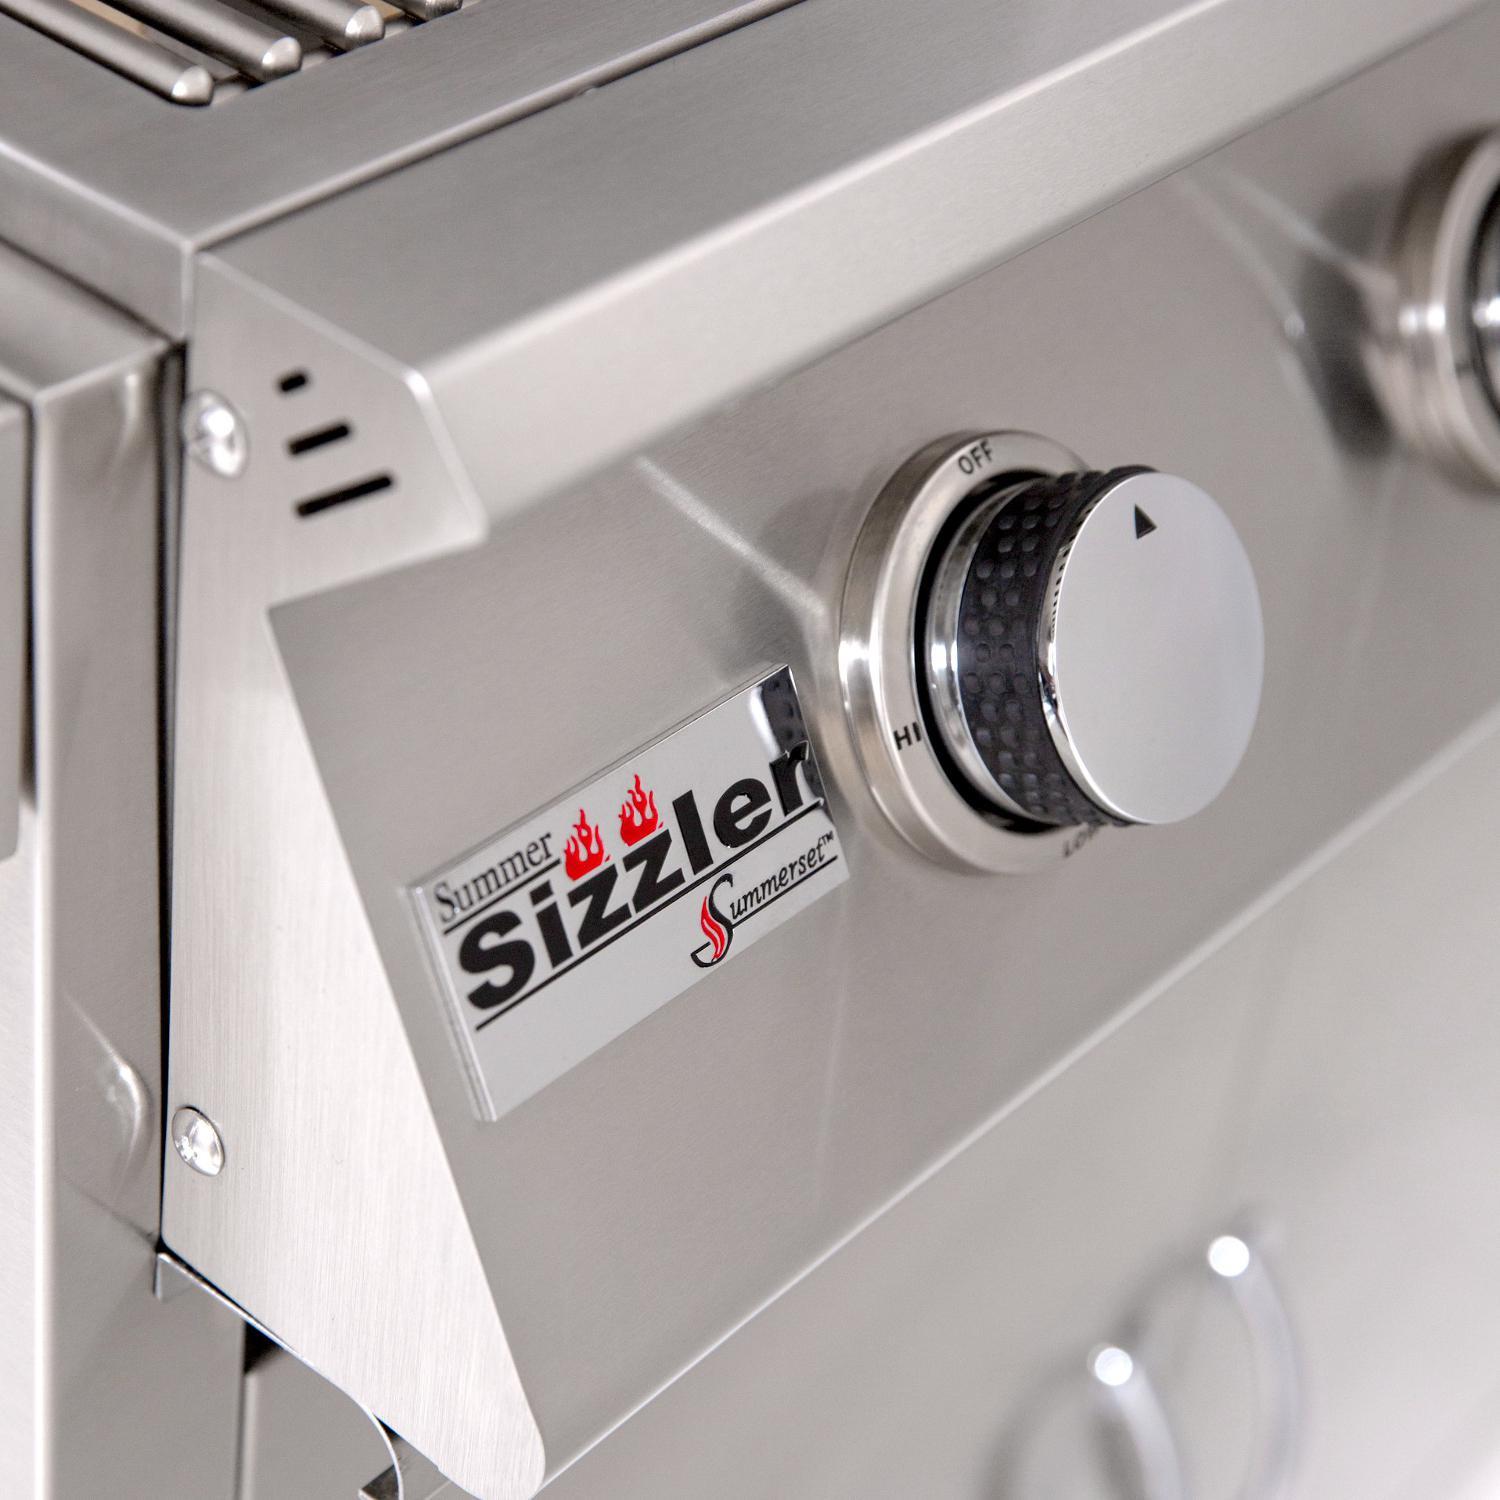 Summerset Grills Grills Sizzler Grill, 26" LP/NG - Built-in